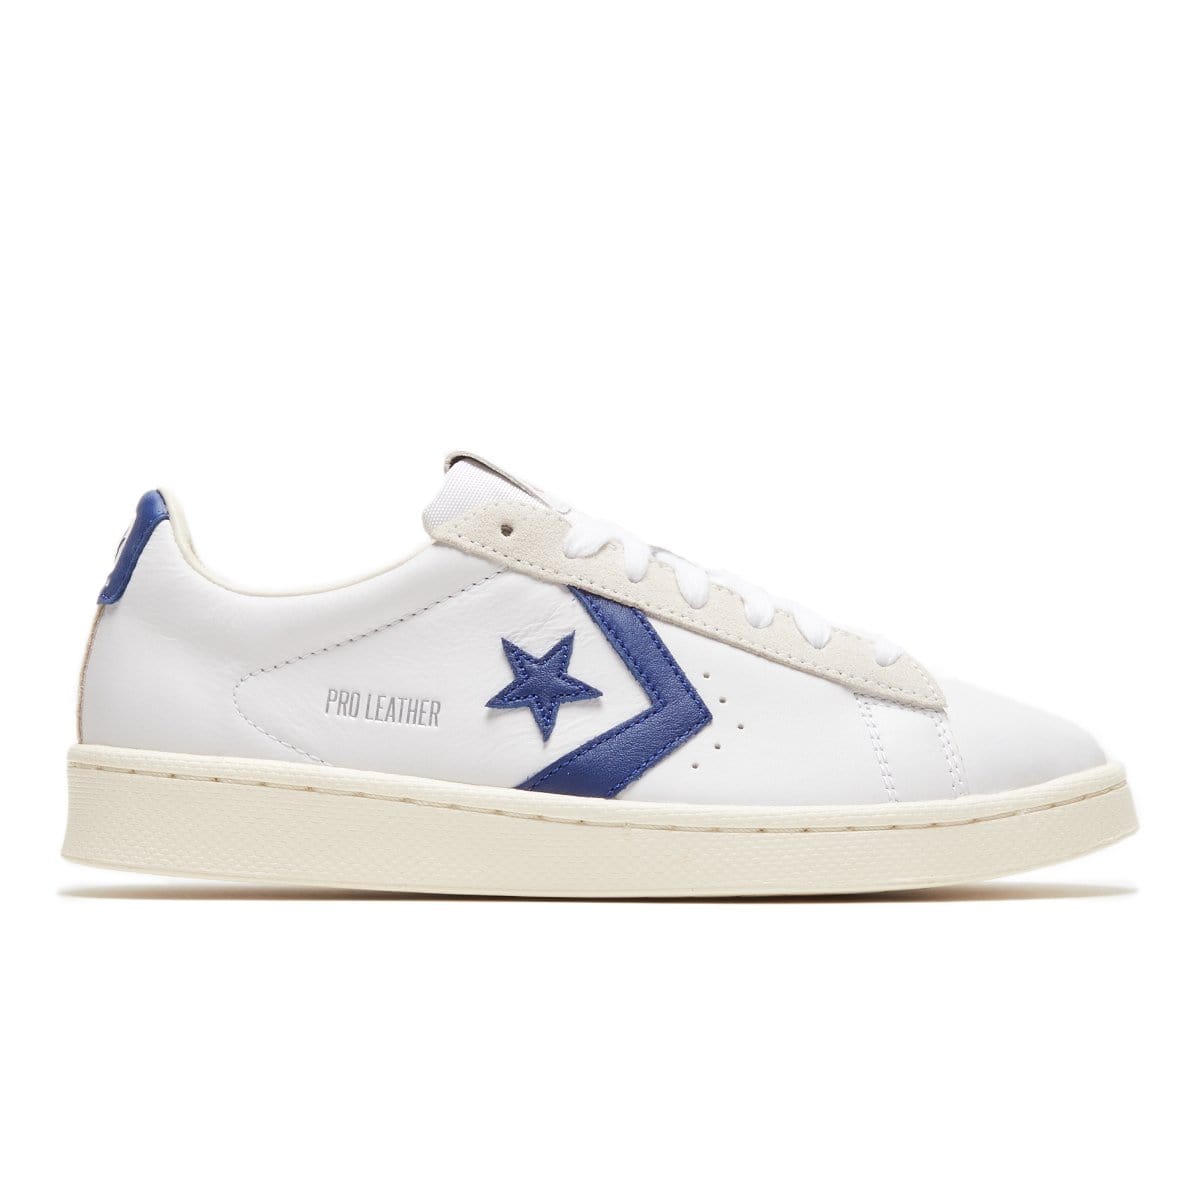 Converse Casual PRO LEATHER OX